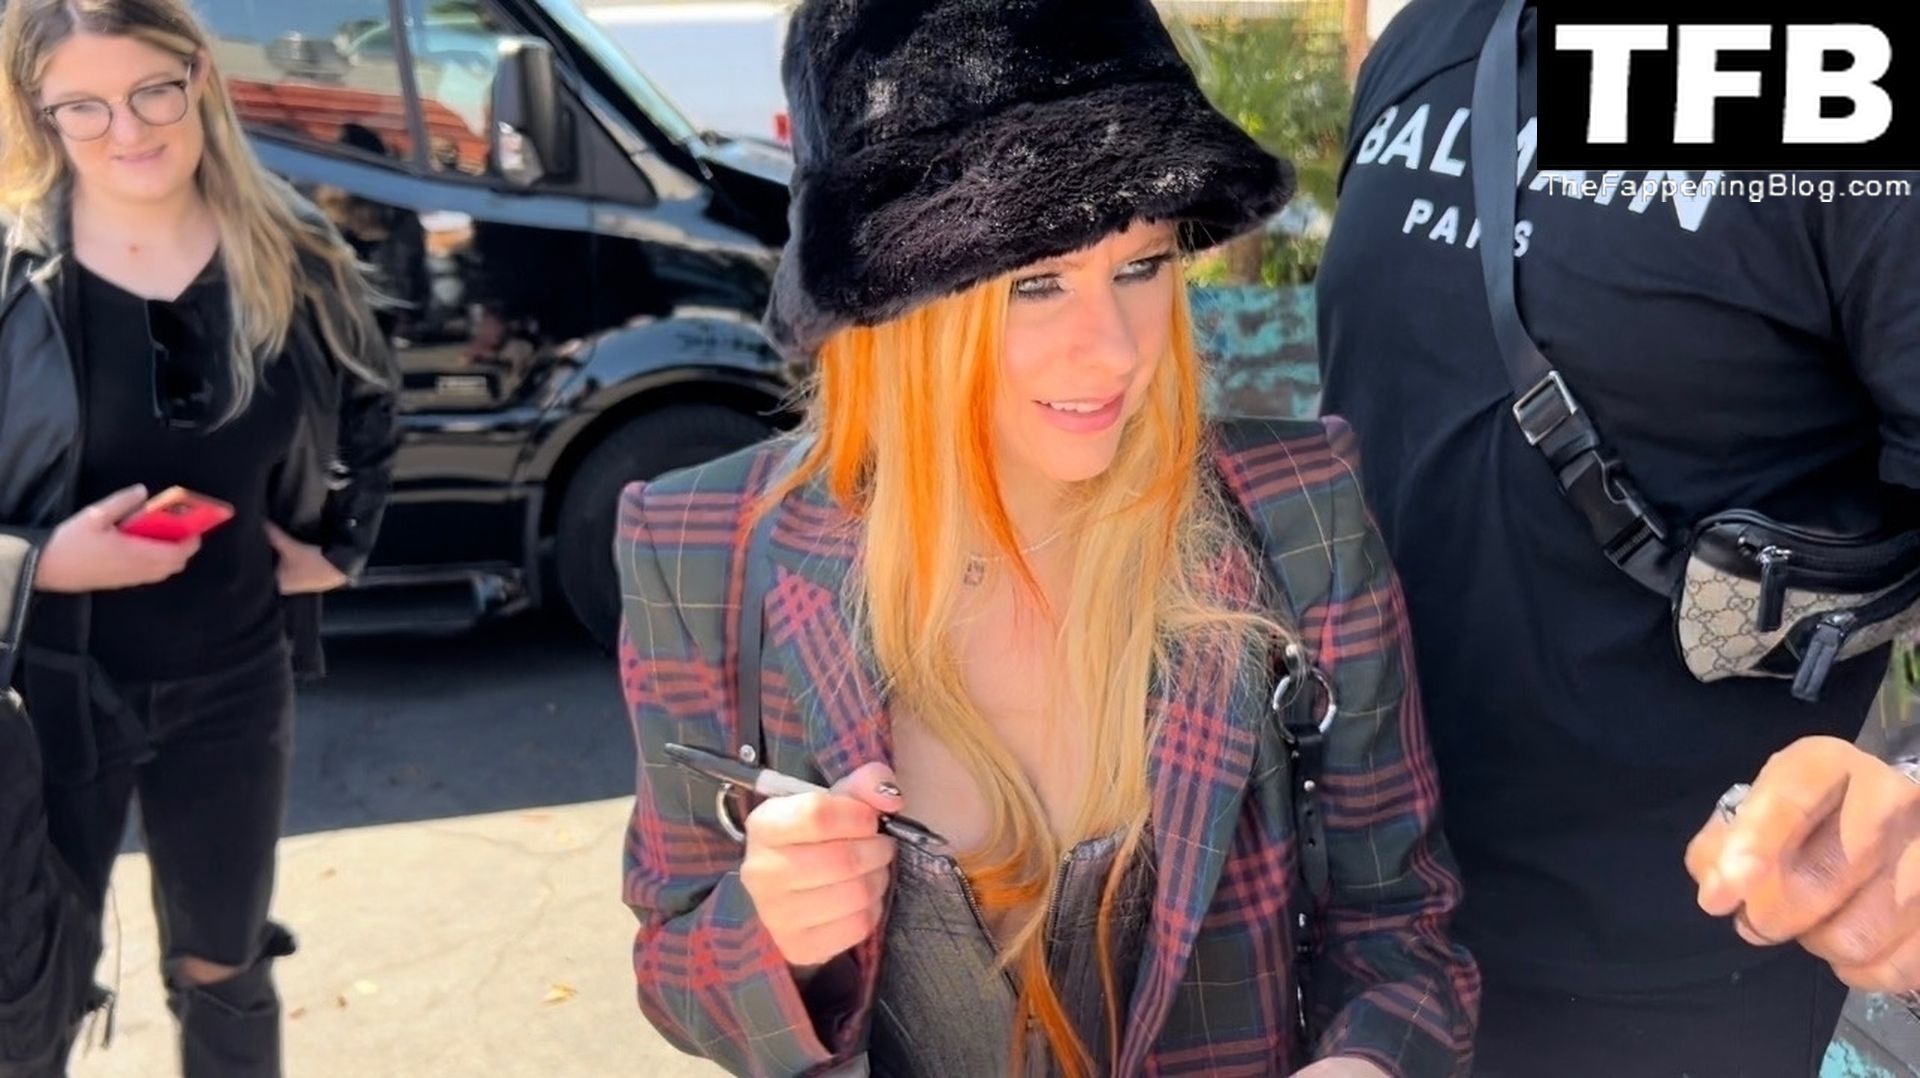 Avril Lavigne Sexy The Fappening Blog 21 - Avril Lavigne Receives a Star on the Hollywood Walk of Fame (31 Photos)